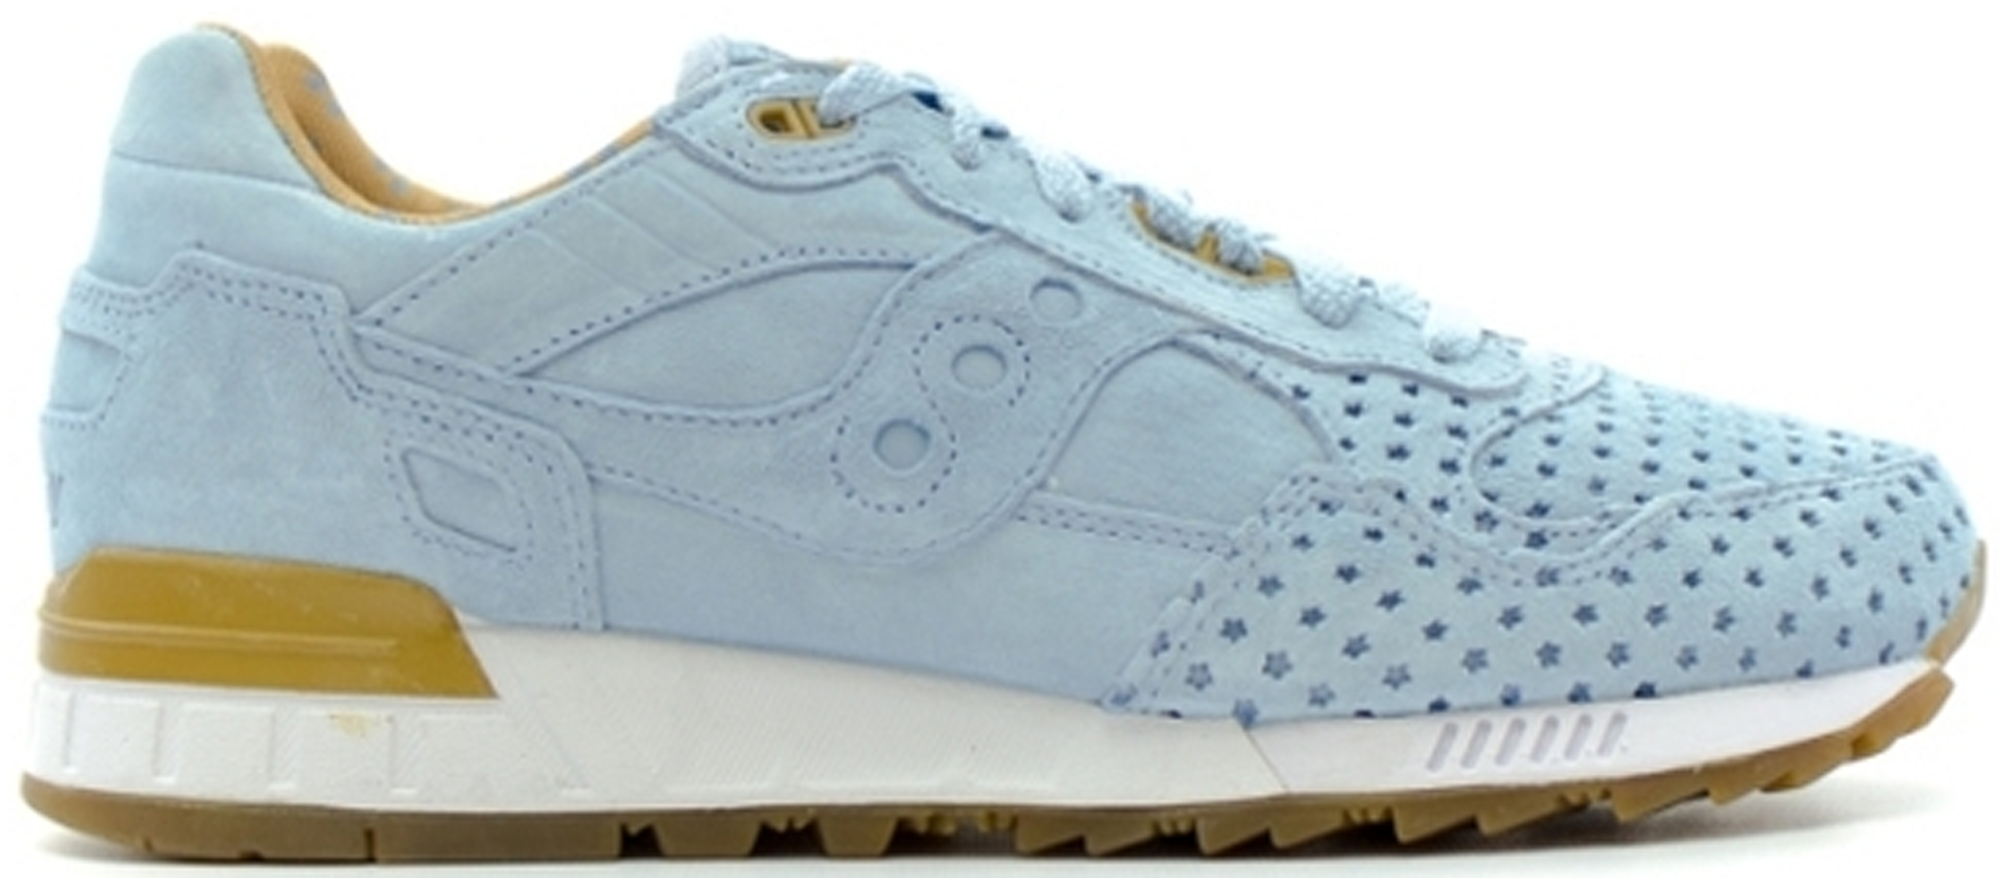 saucony cotton candy pack for sale